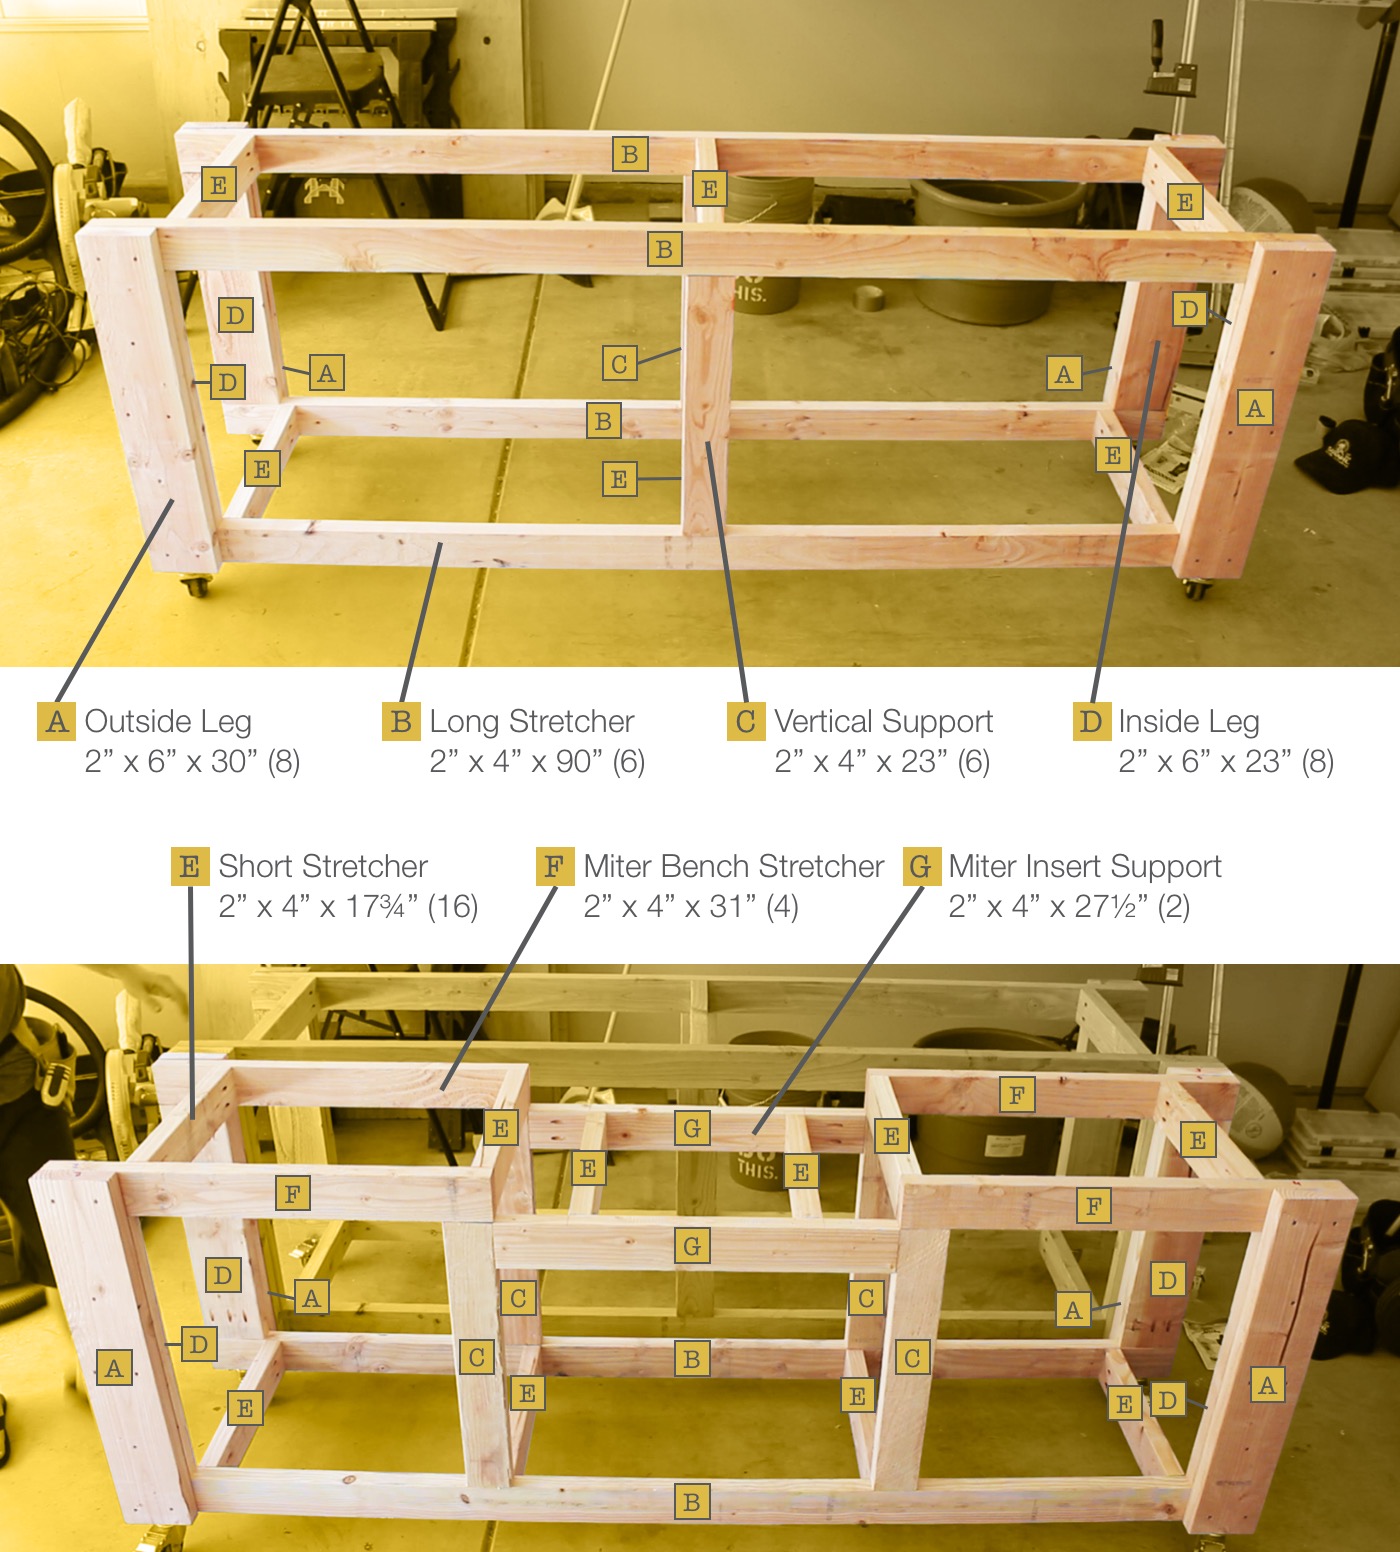 detailed plans for a mobile modular workbench